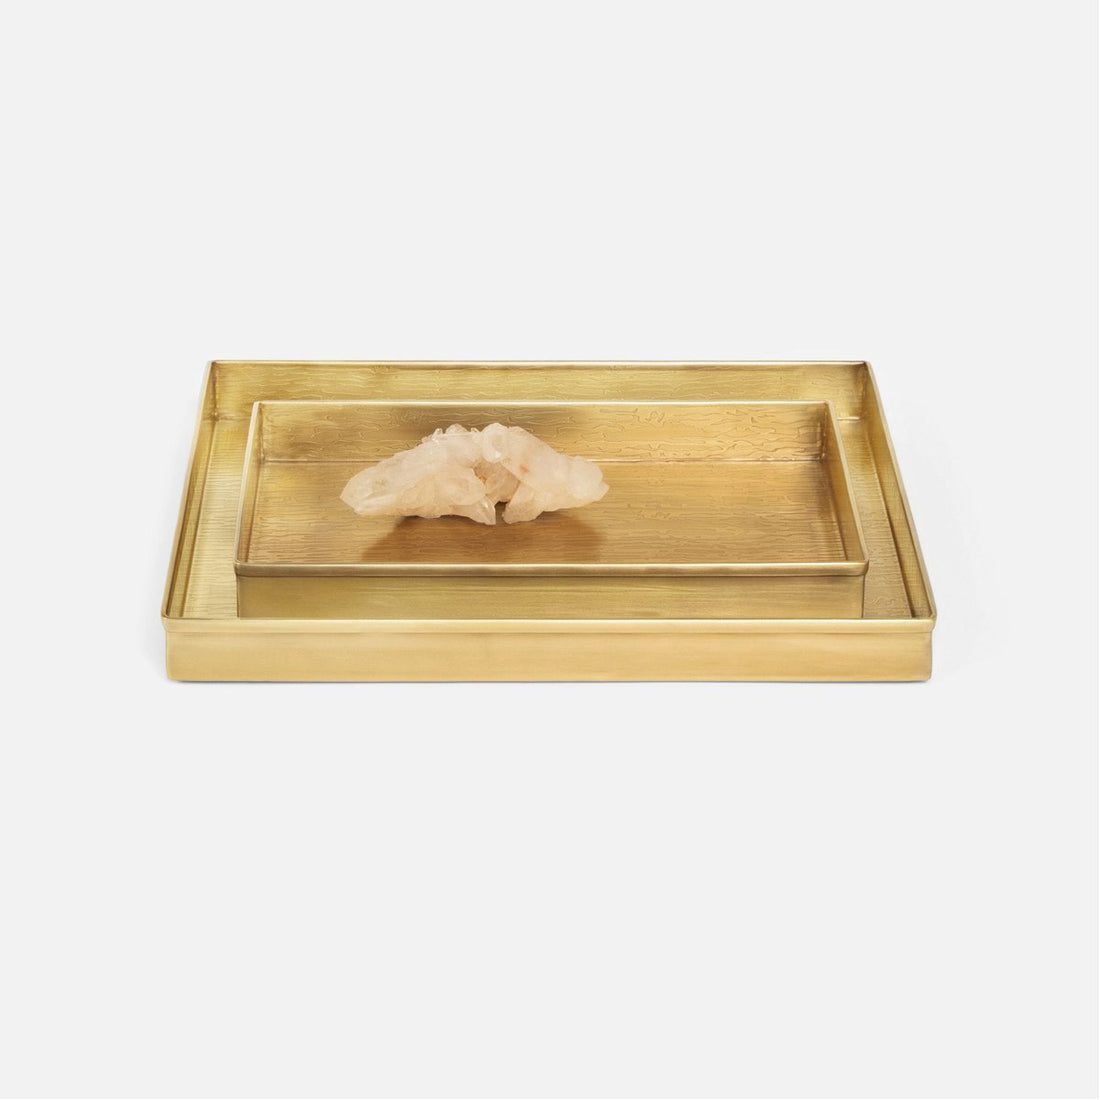 Pigeon and Poodle Elgin Rectangular Tray - Straight, 2-Piece Set